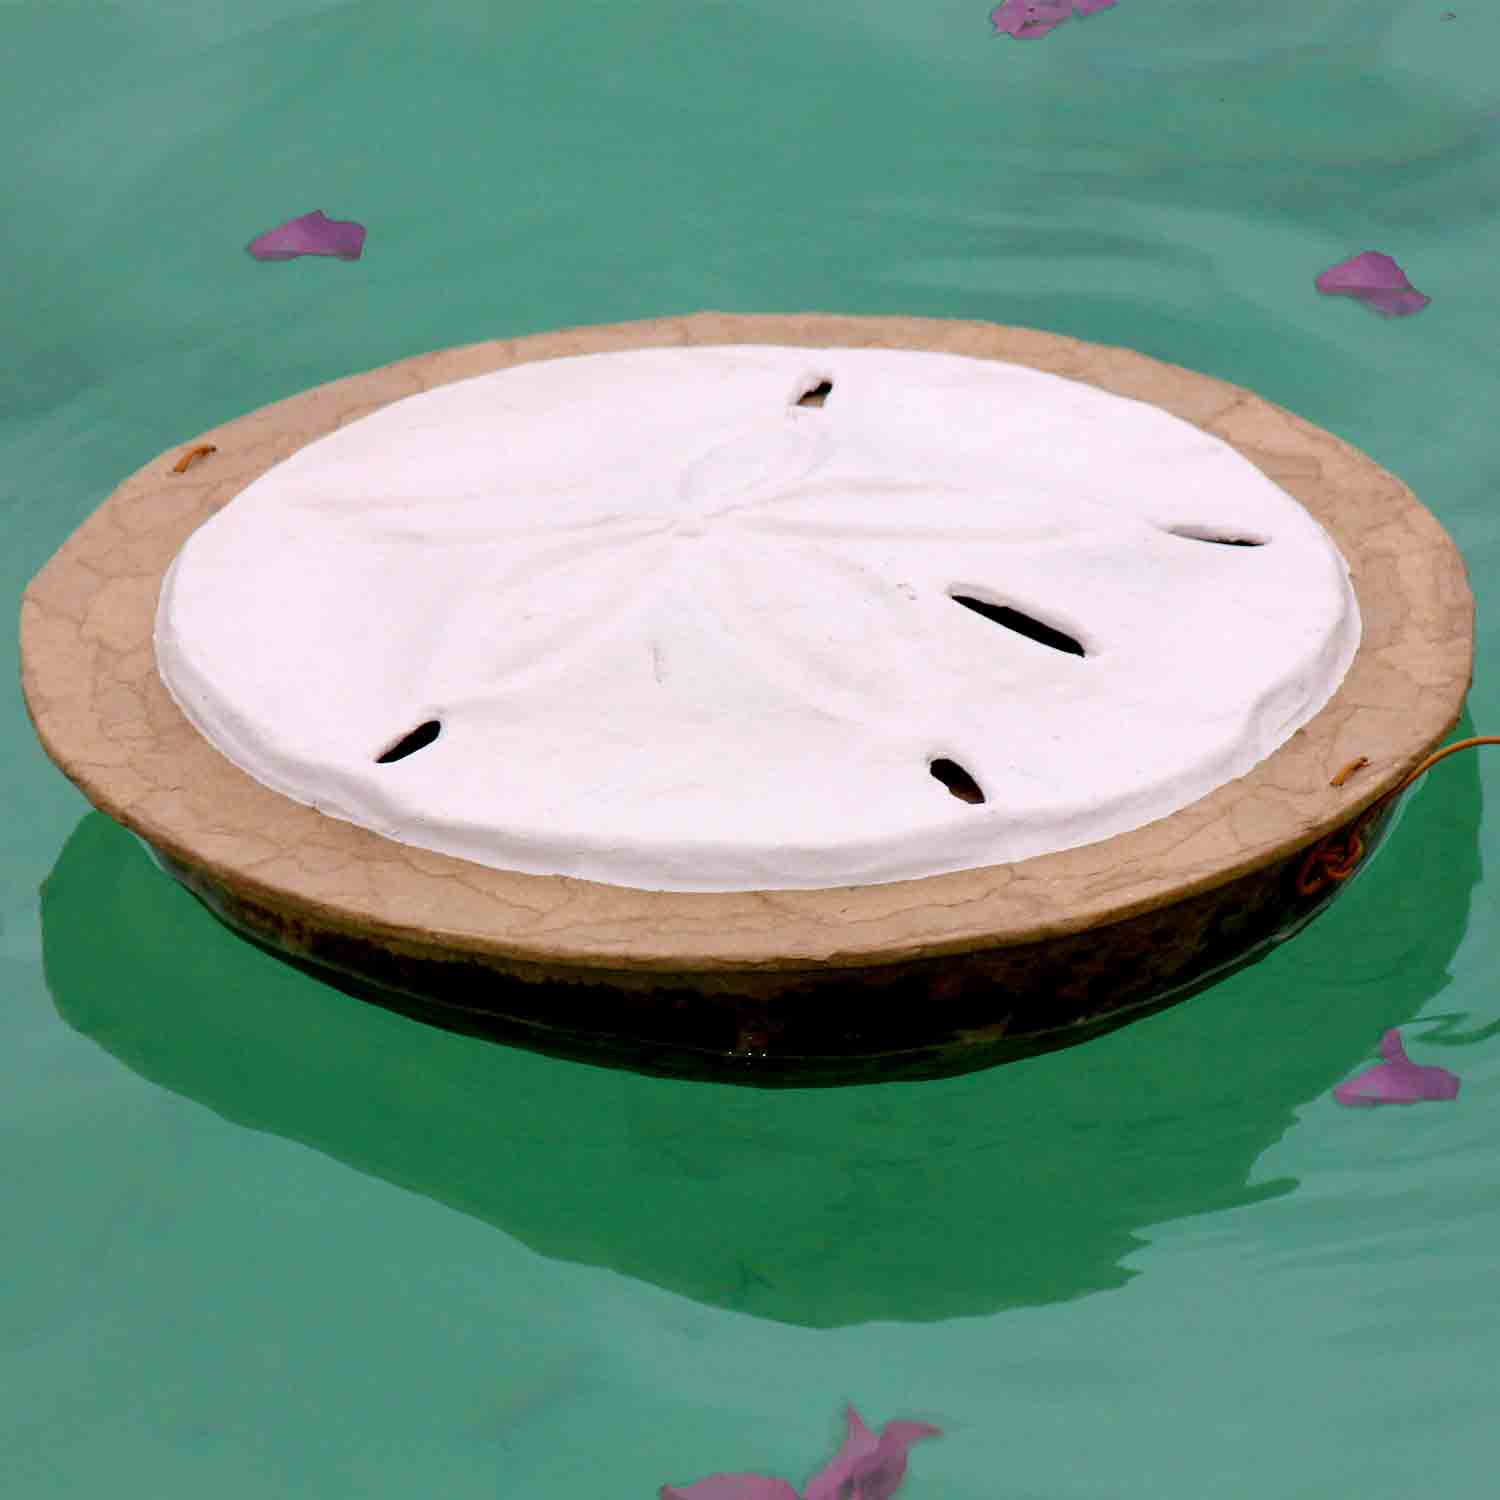 Serenity Sand Dollar Biodegradable Water Urn for Ashes in Water with Petals